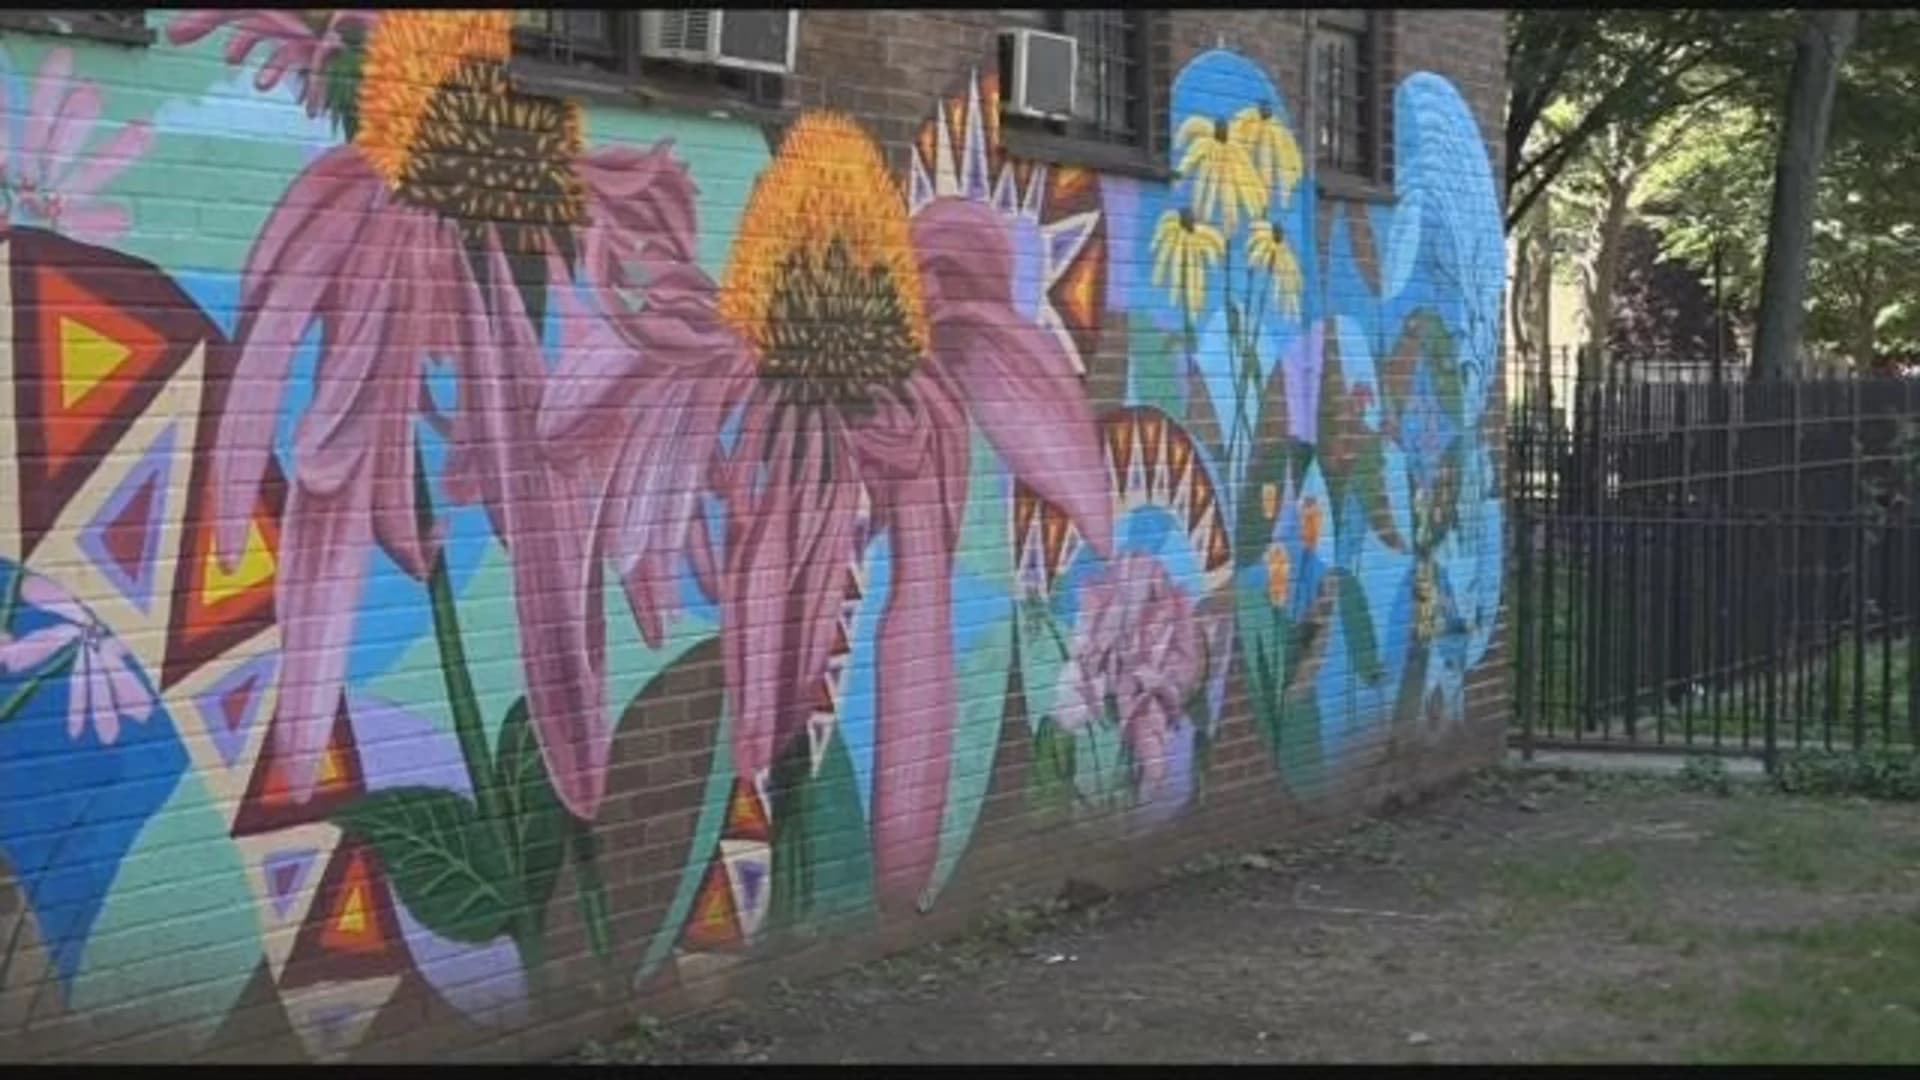 Flower mural unveiled at Tompkins Houses in Bed-Stuy